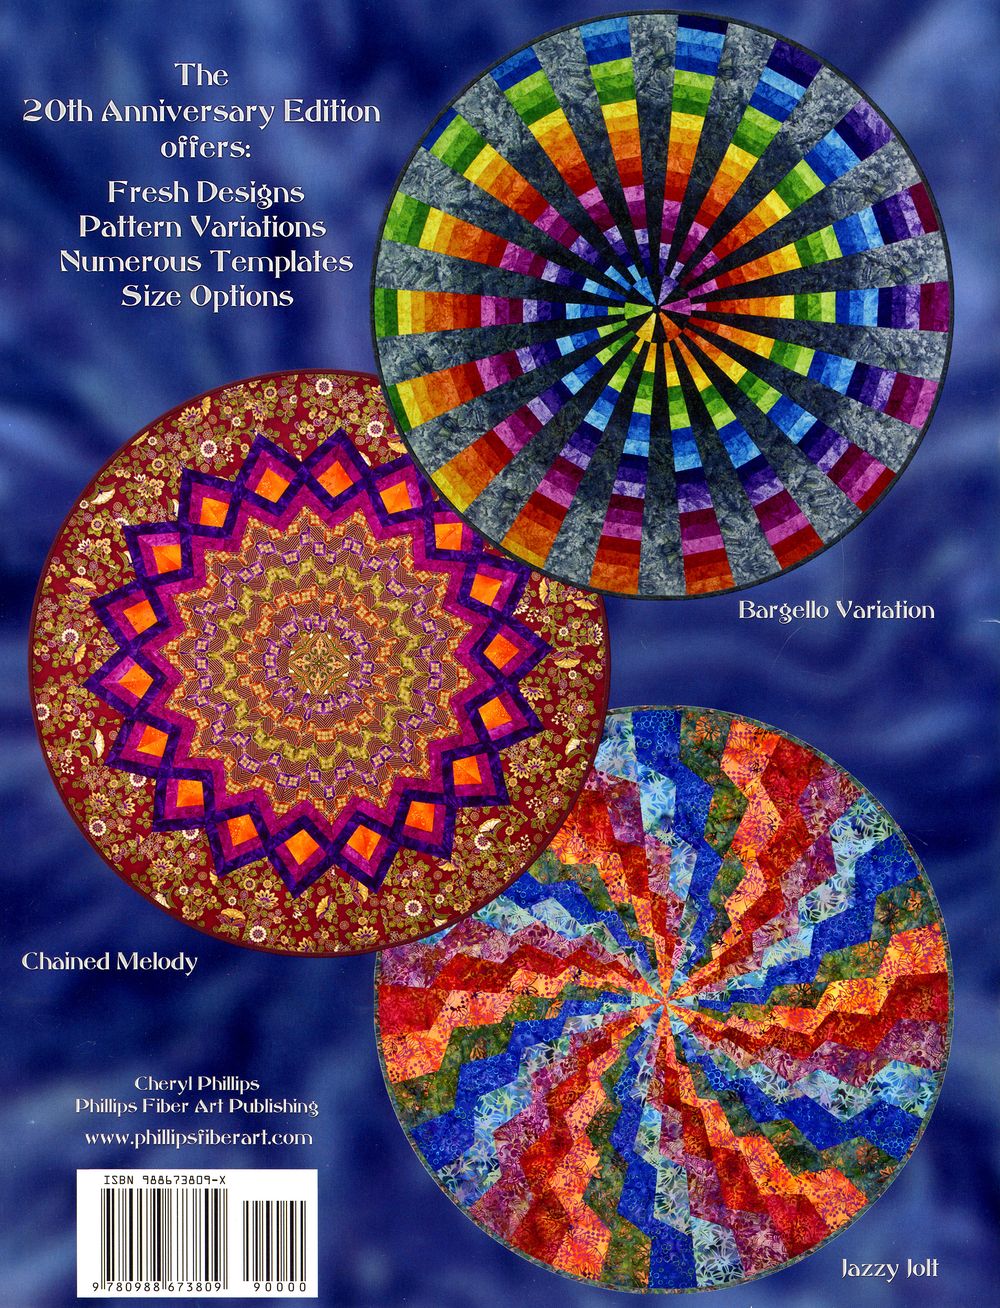 Quilts Without Corners Platinum Edition Quilt Book by Cheryl Phillips of Phillips Fiber Art